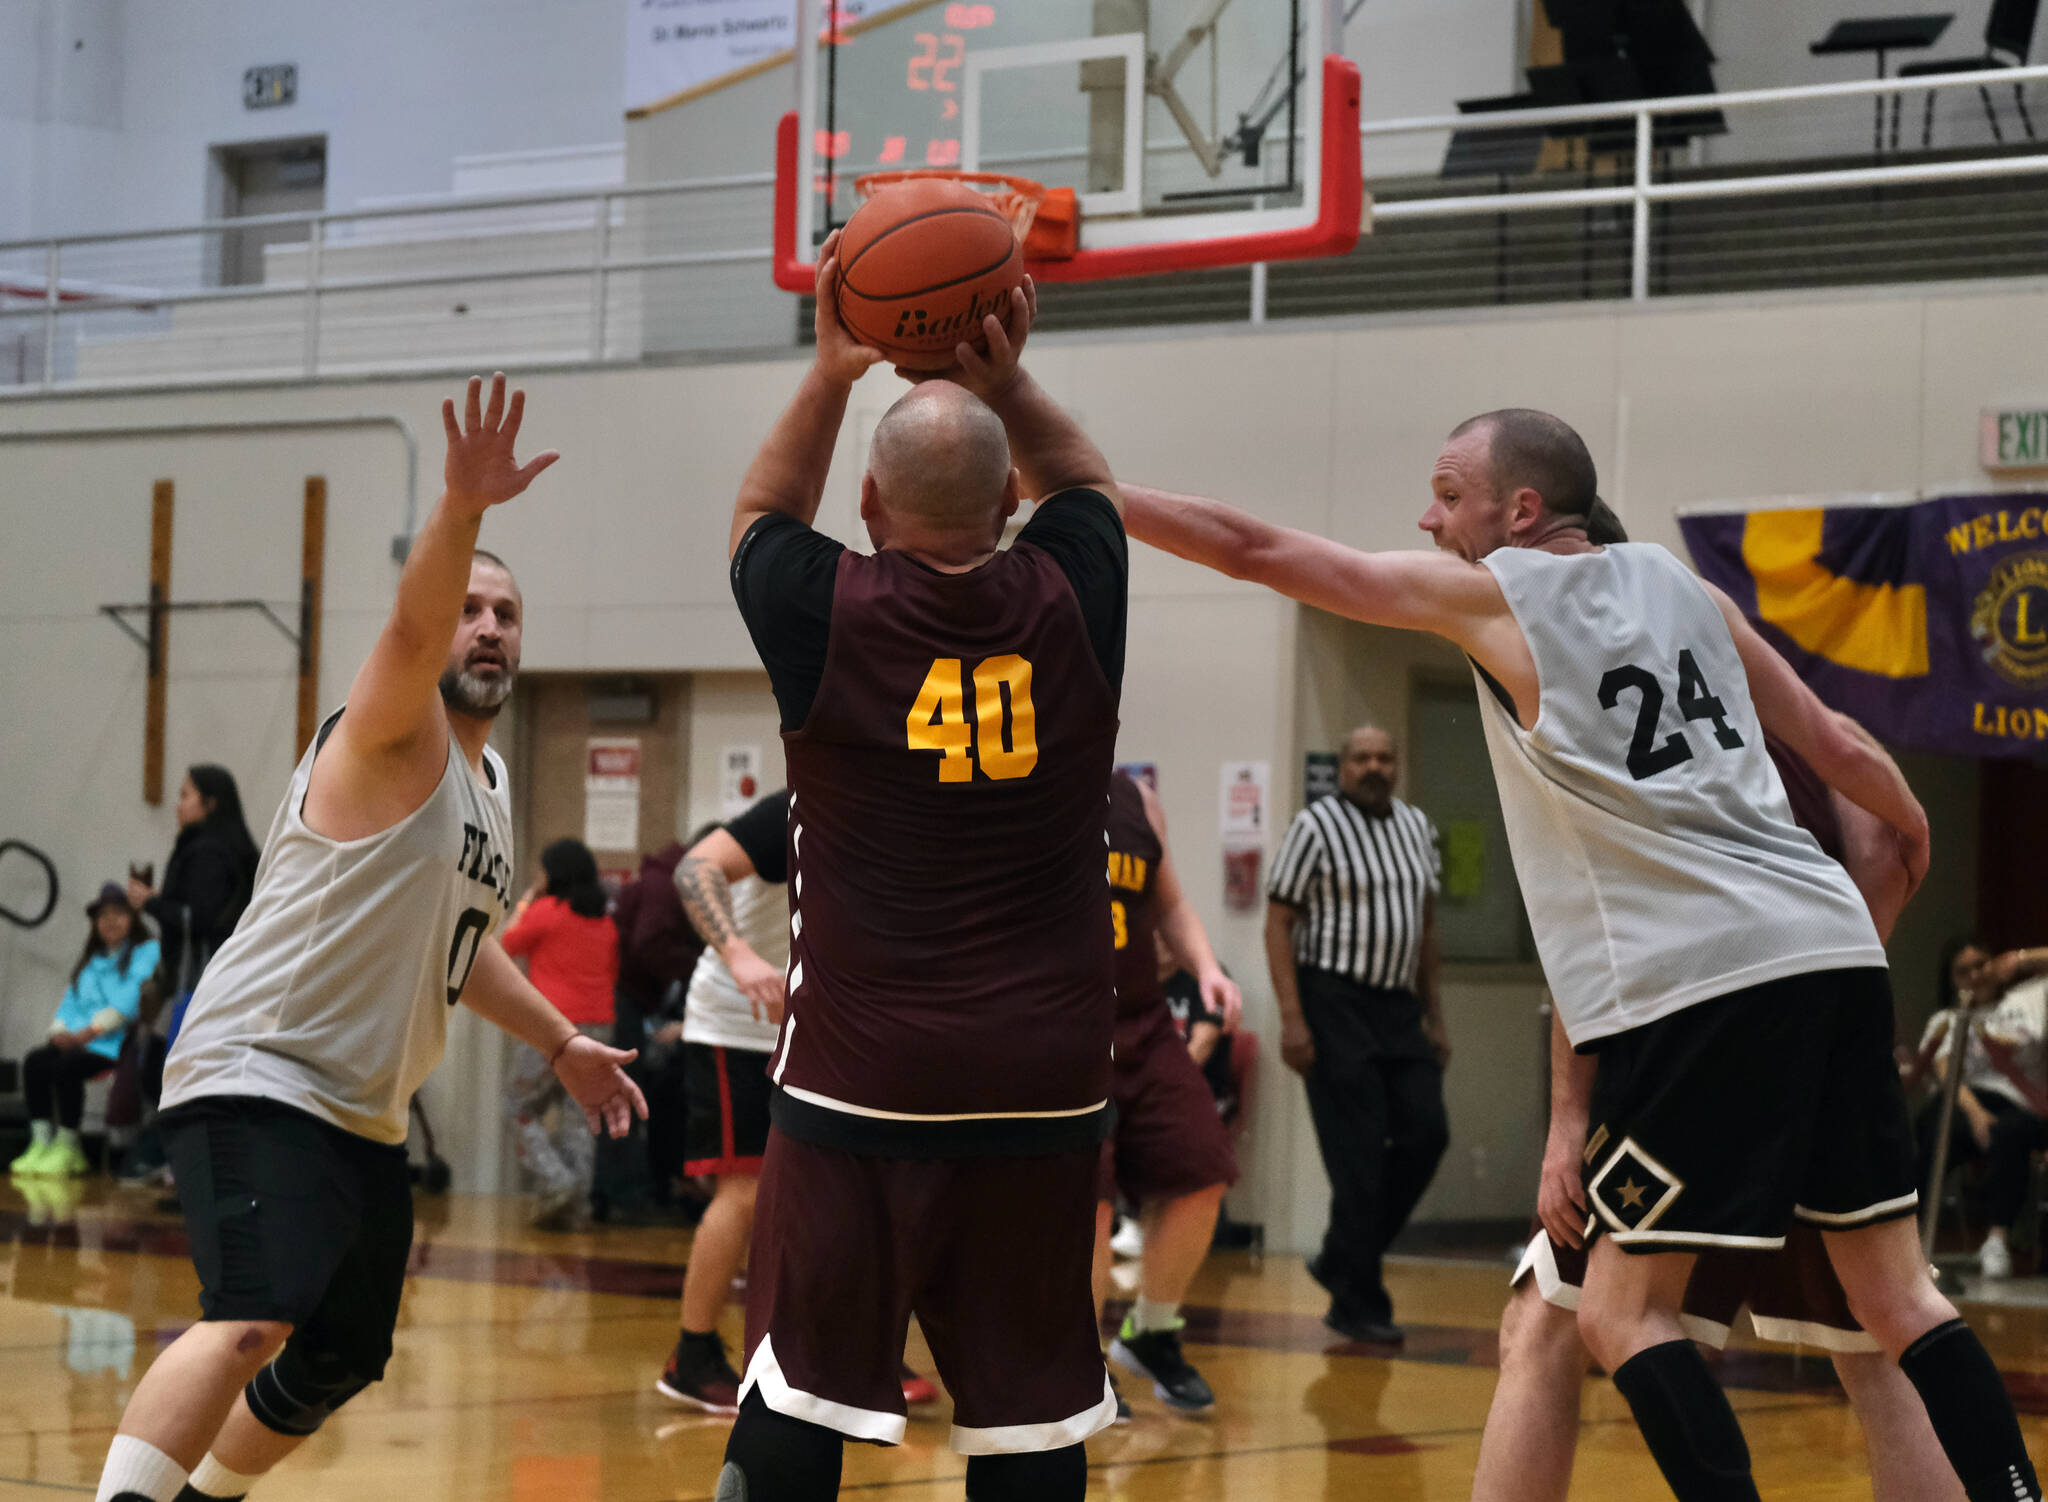 Klukwan’s Stuart Dewitt (40) shoots under pressure from Filcom’s Ray Zimmer (0) and Alex Heumann (24) during the C Bracket Championship at the Gold Medal Basketball Tournament, Saturday, March 25, at Juneau-Douglas High School: Yadaa.at Kalé. (Klas Stolpe/For the Juneau Empire)